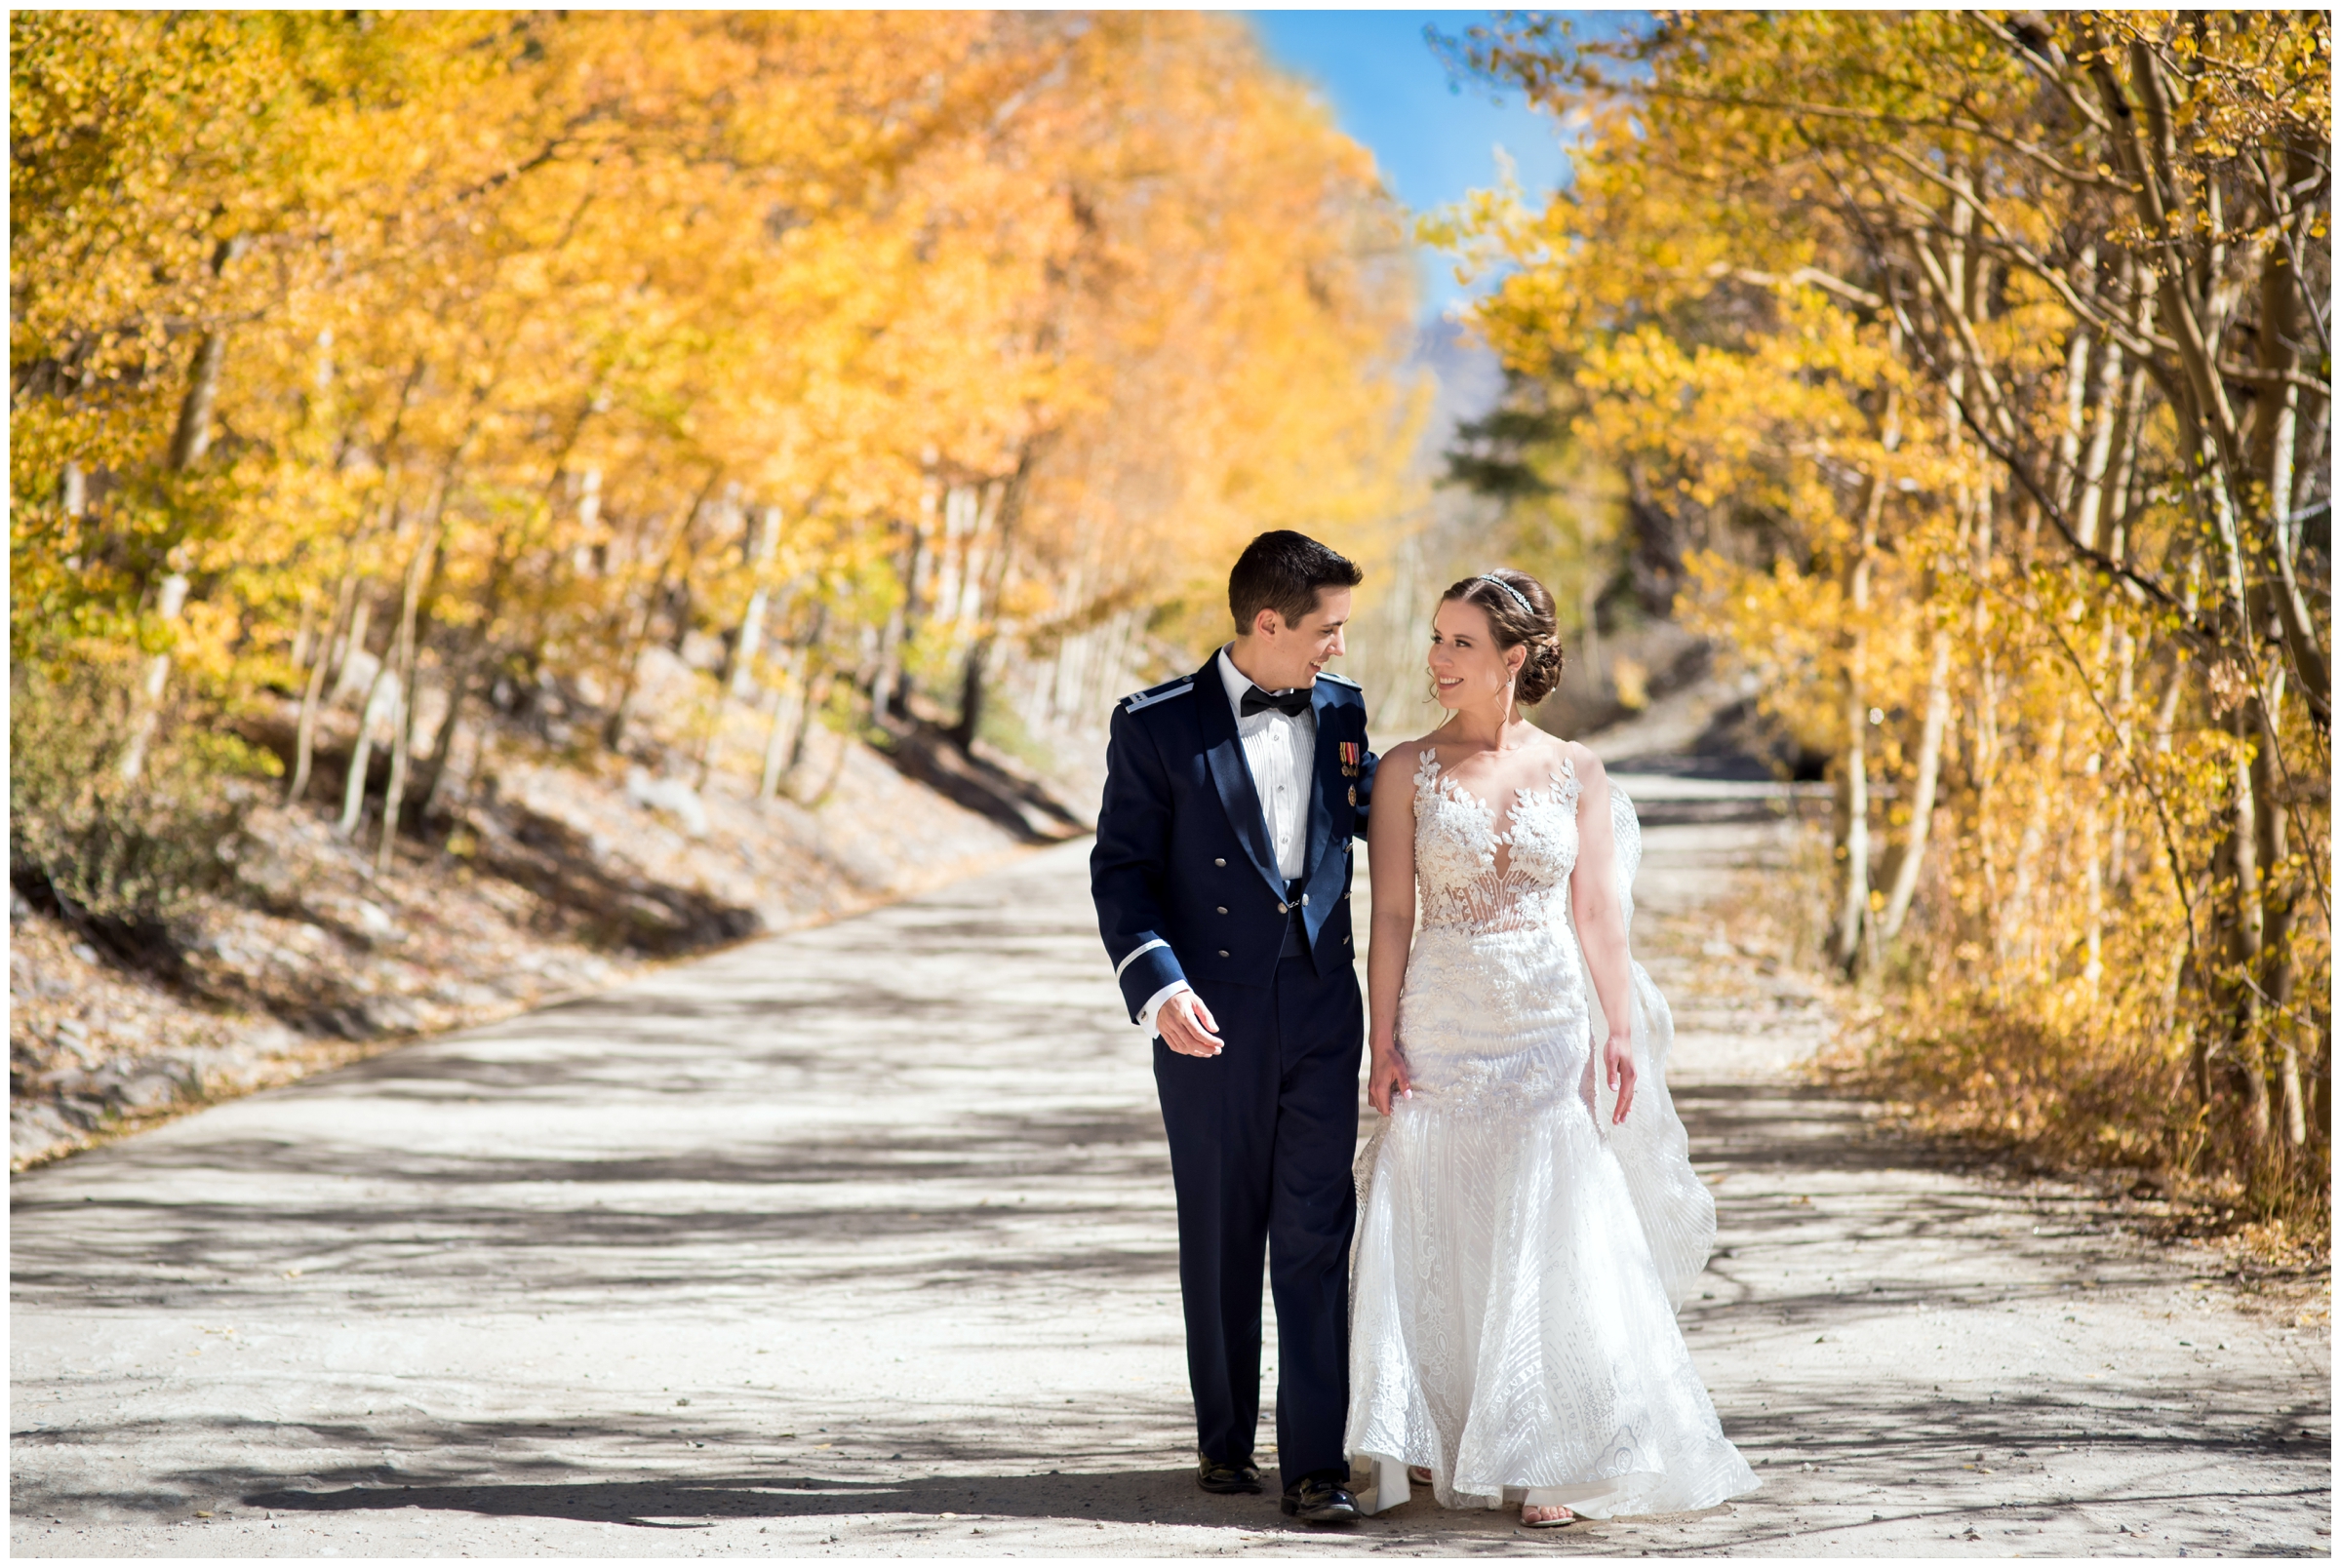 The Lodge at Breckenridge wedding photos by Summit County photographer Plum Pretty Photography. Intimate fall wedding in the Colorado mountains.